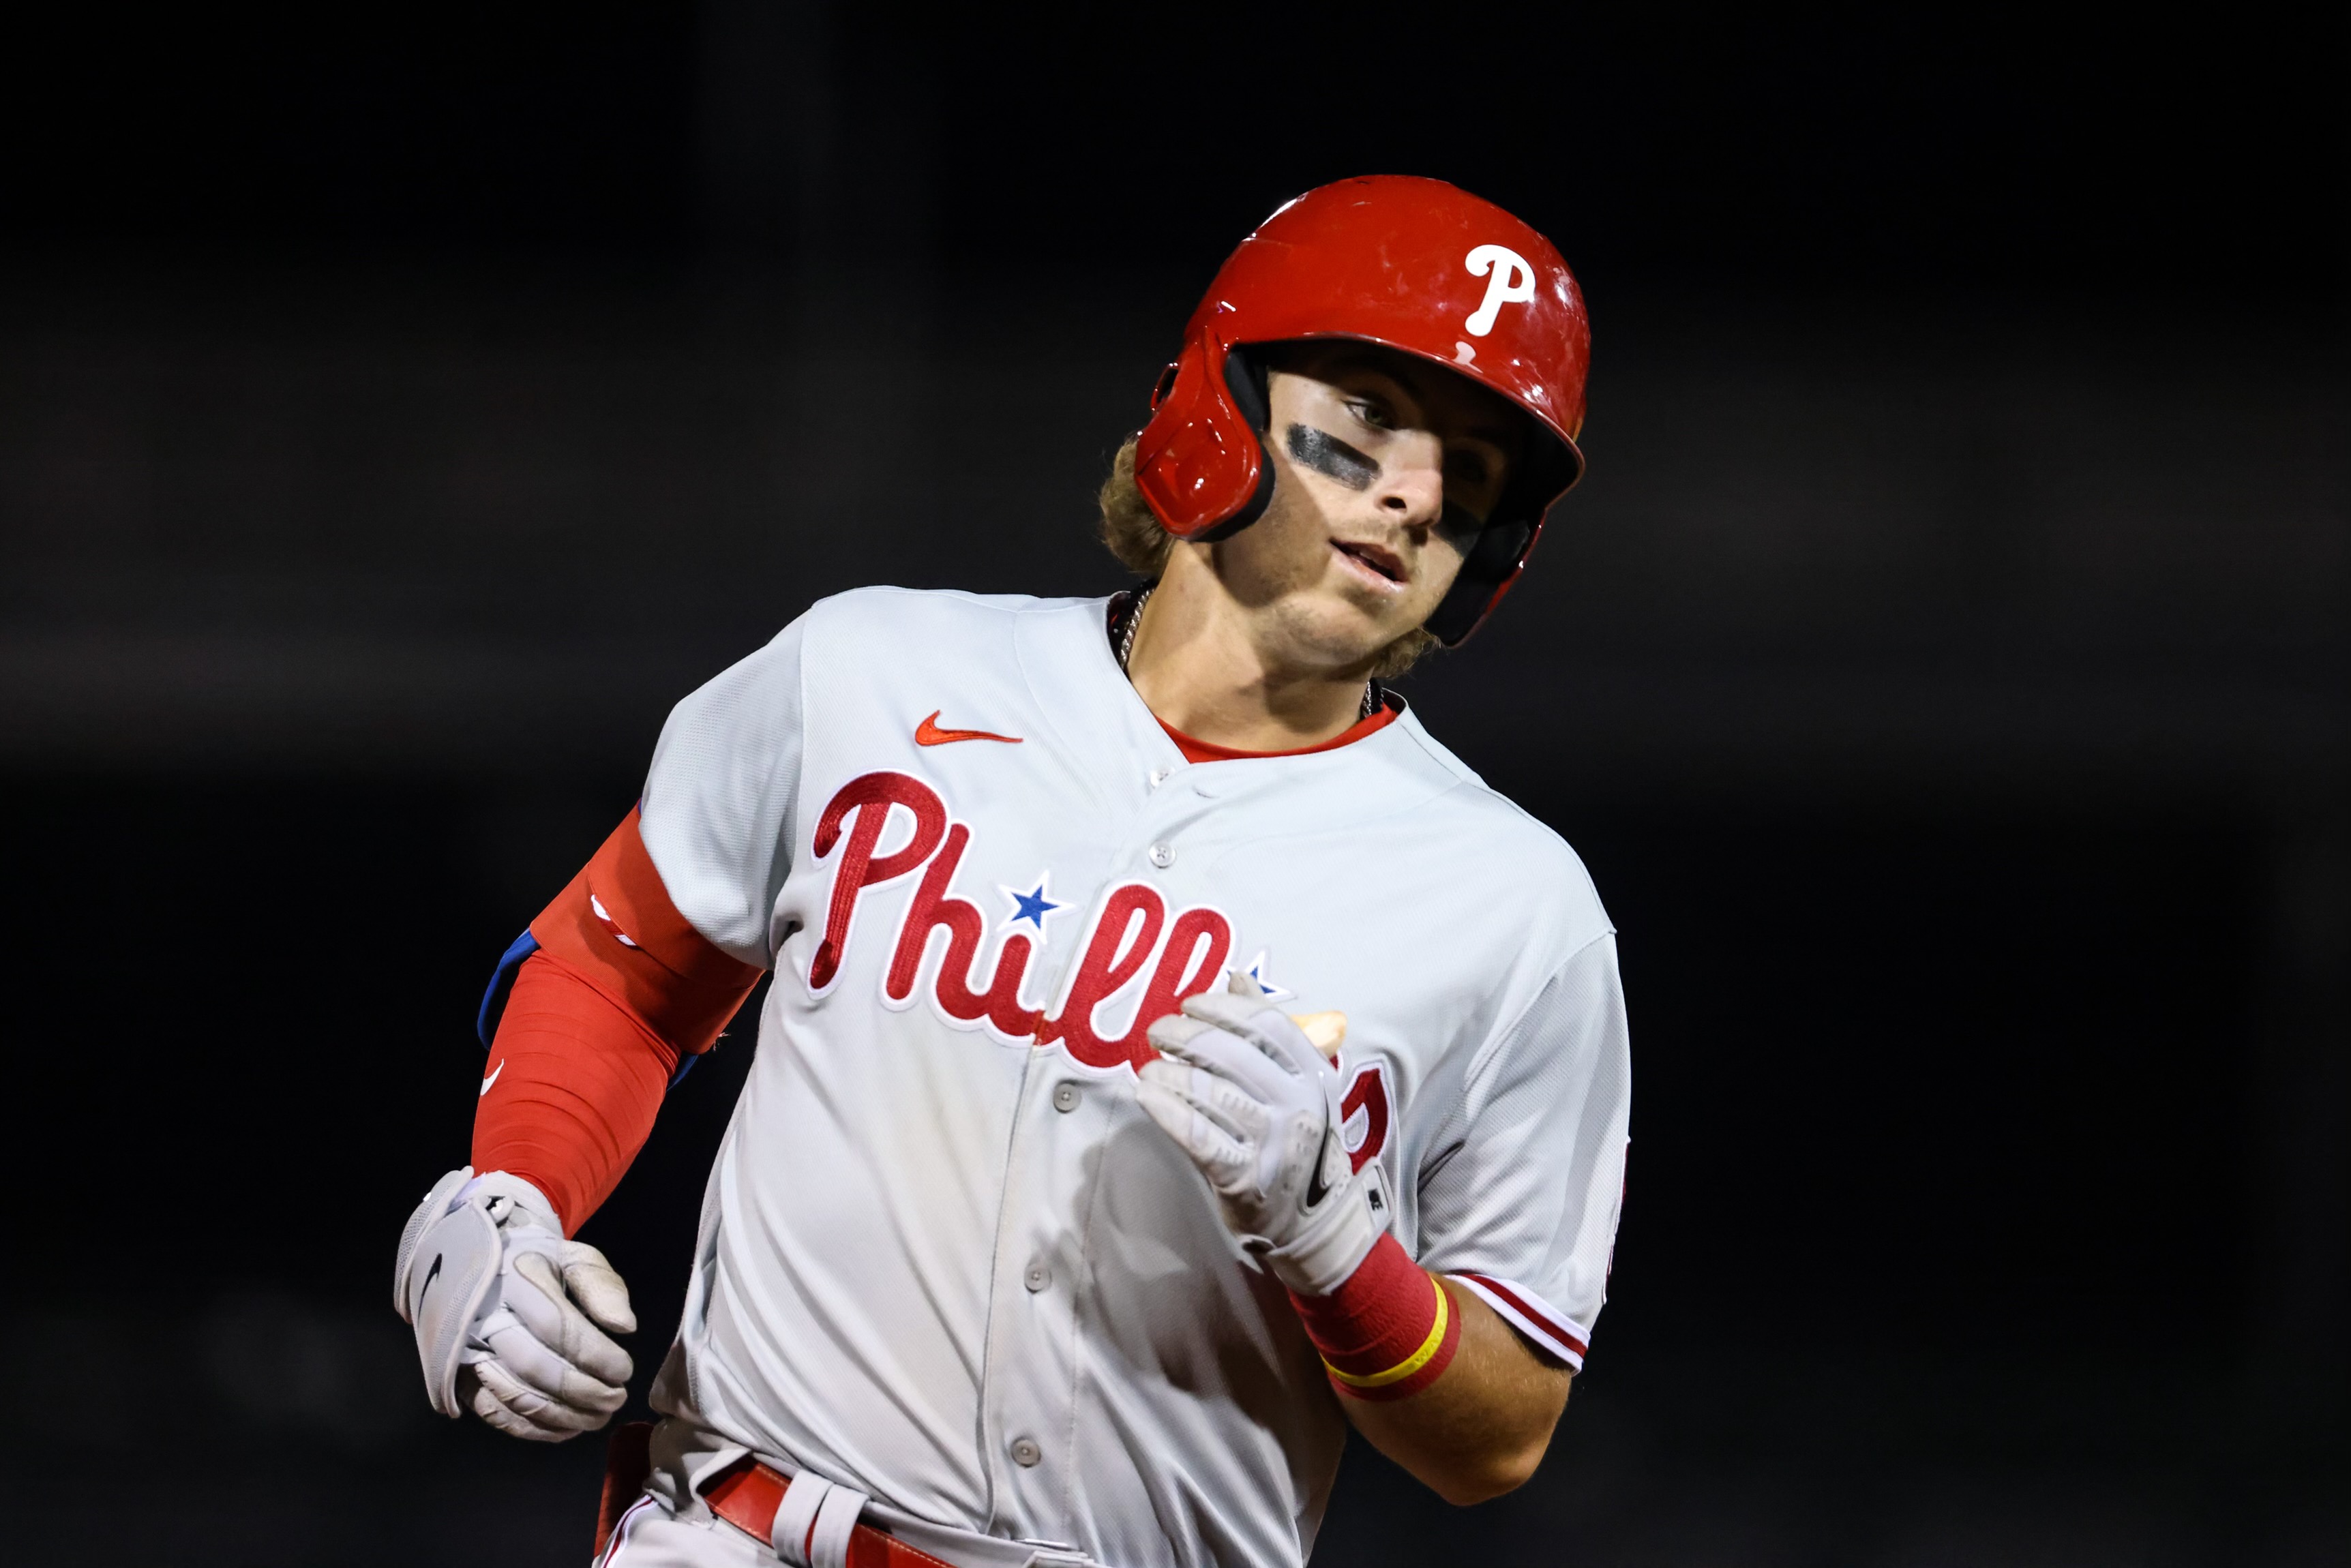 How the Arizona Fall League helped refine Phillies prospect Bryson Stott's  approach at the plate